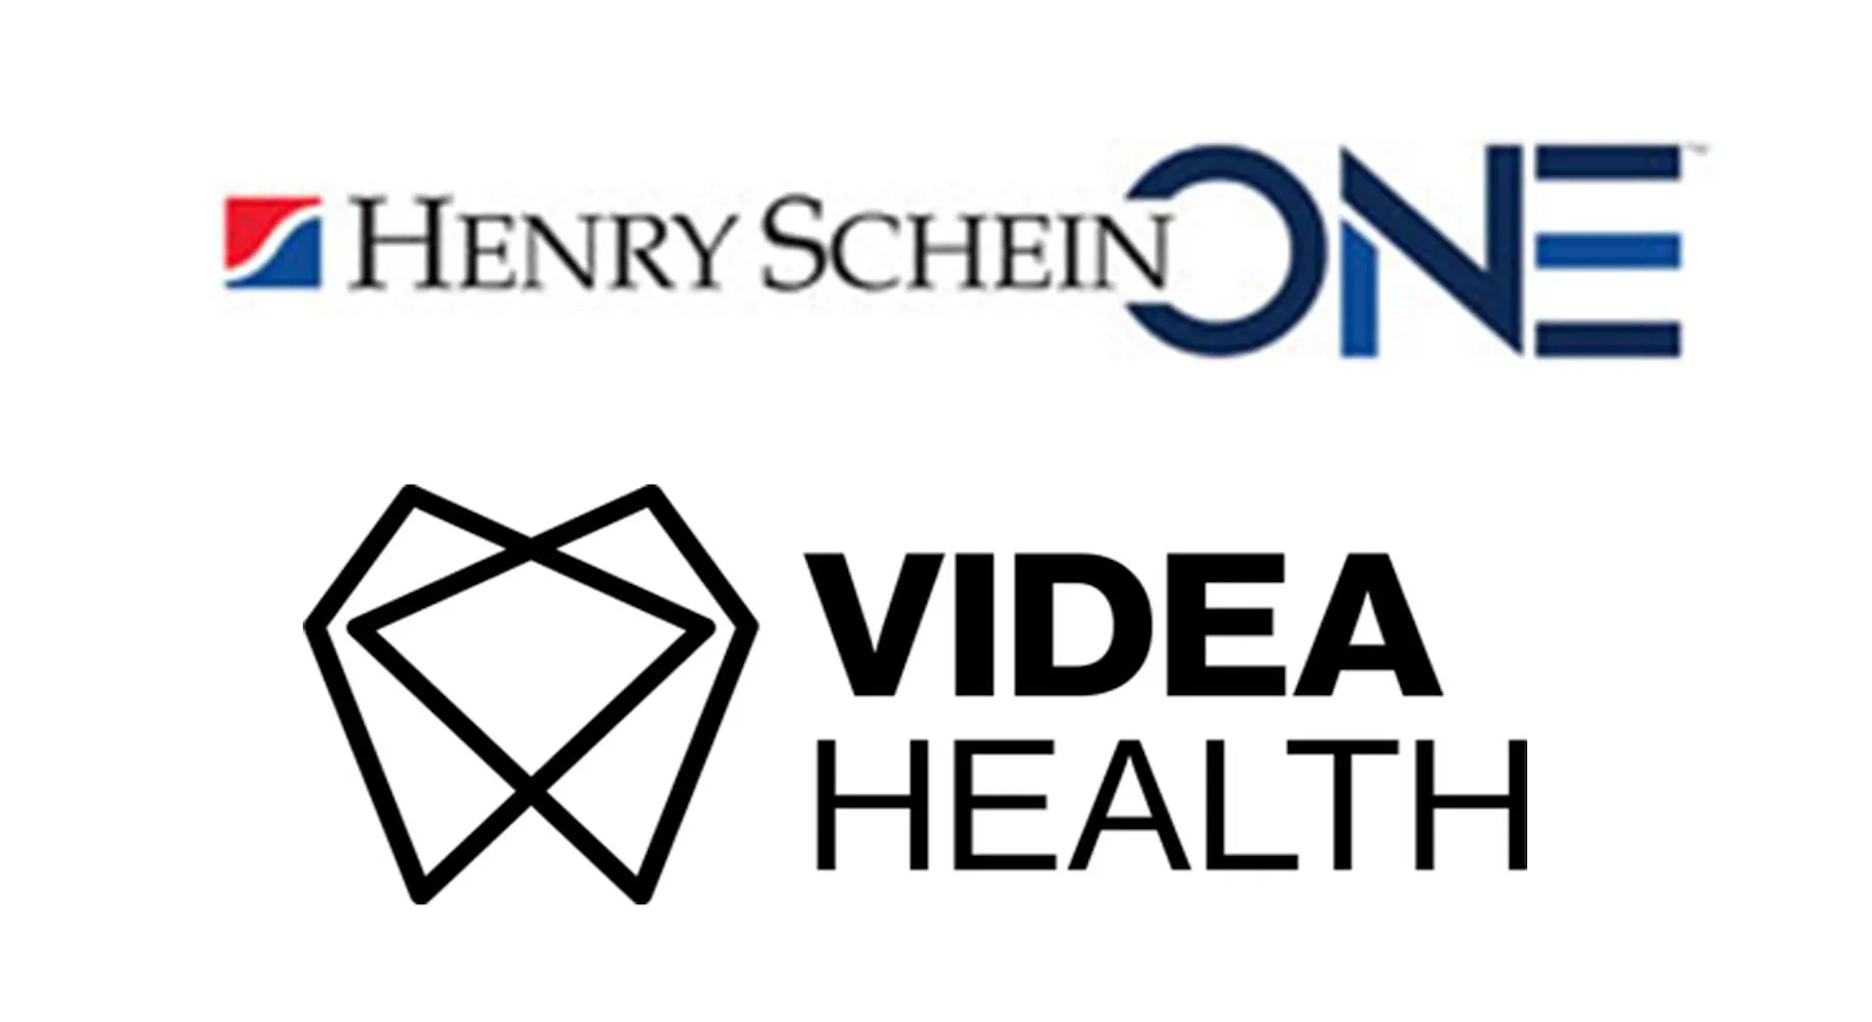 VideaHealth and Henry Schein One Look to Bring Dental AI to More Hygiene Students | Image Credit: © VideaHealth and Henry Schein One